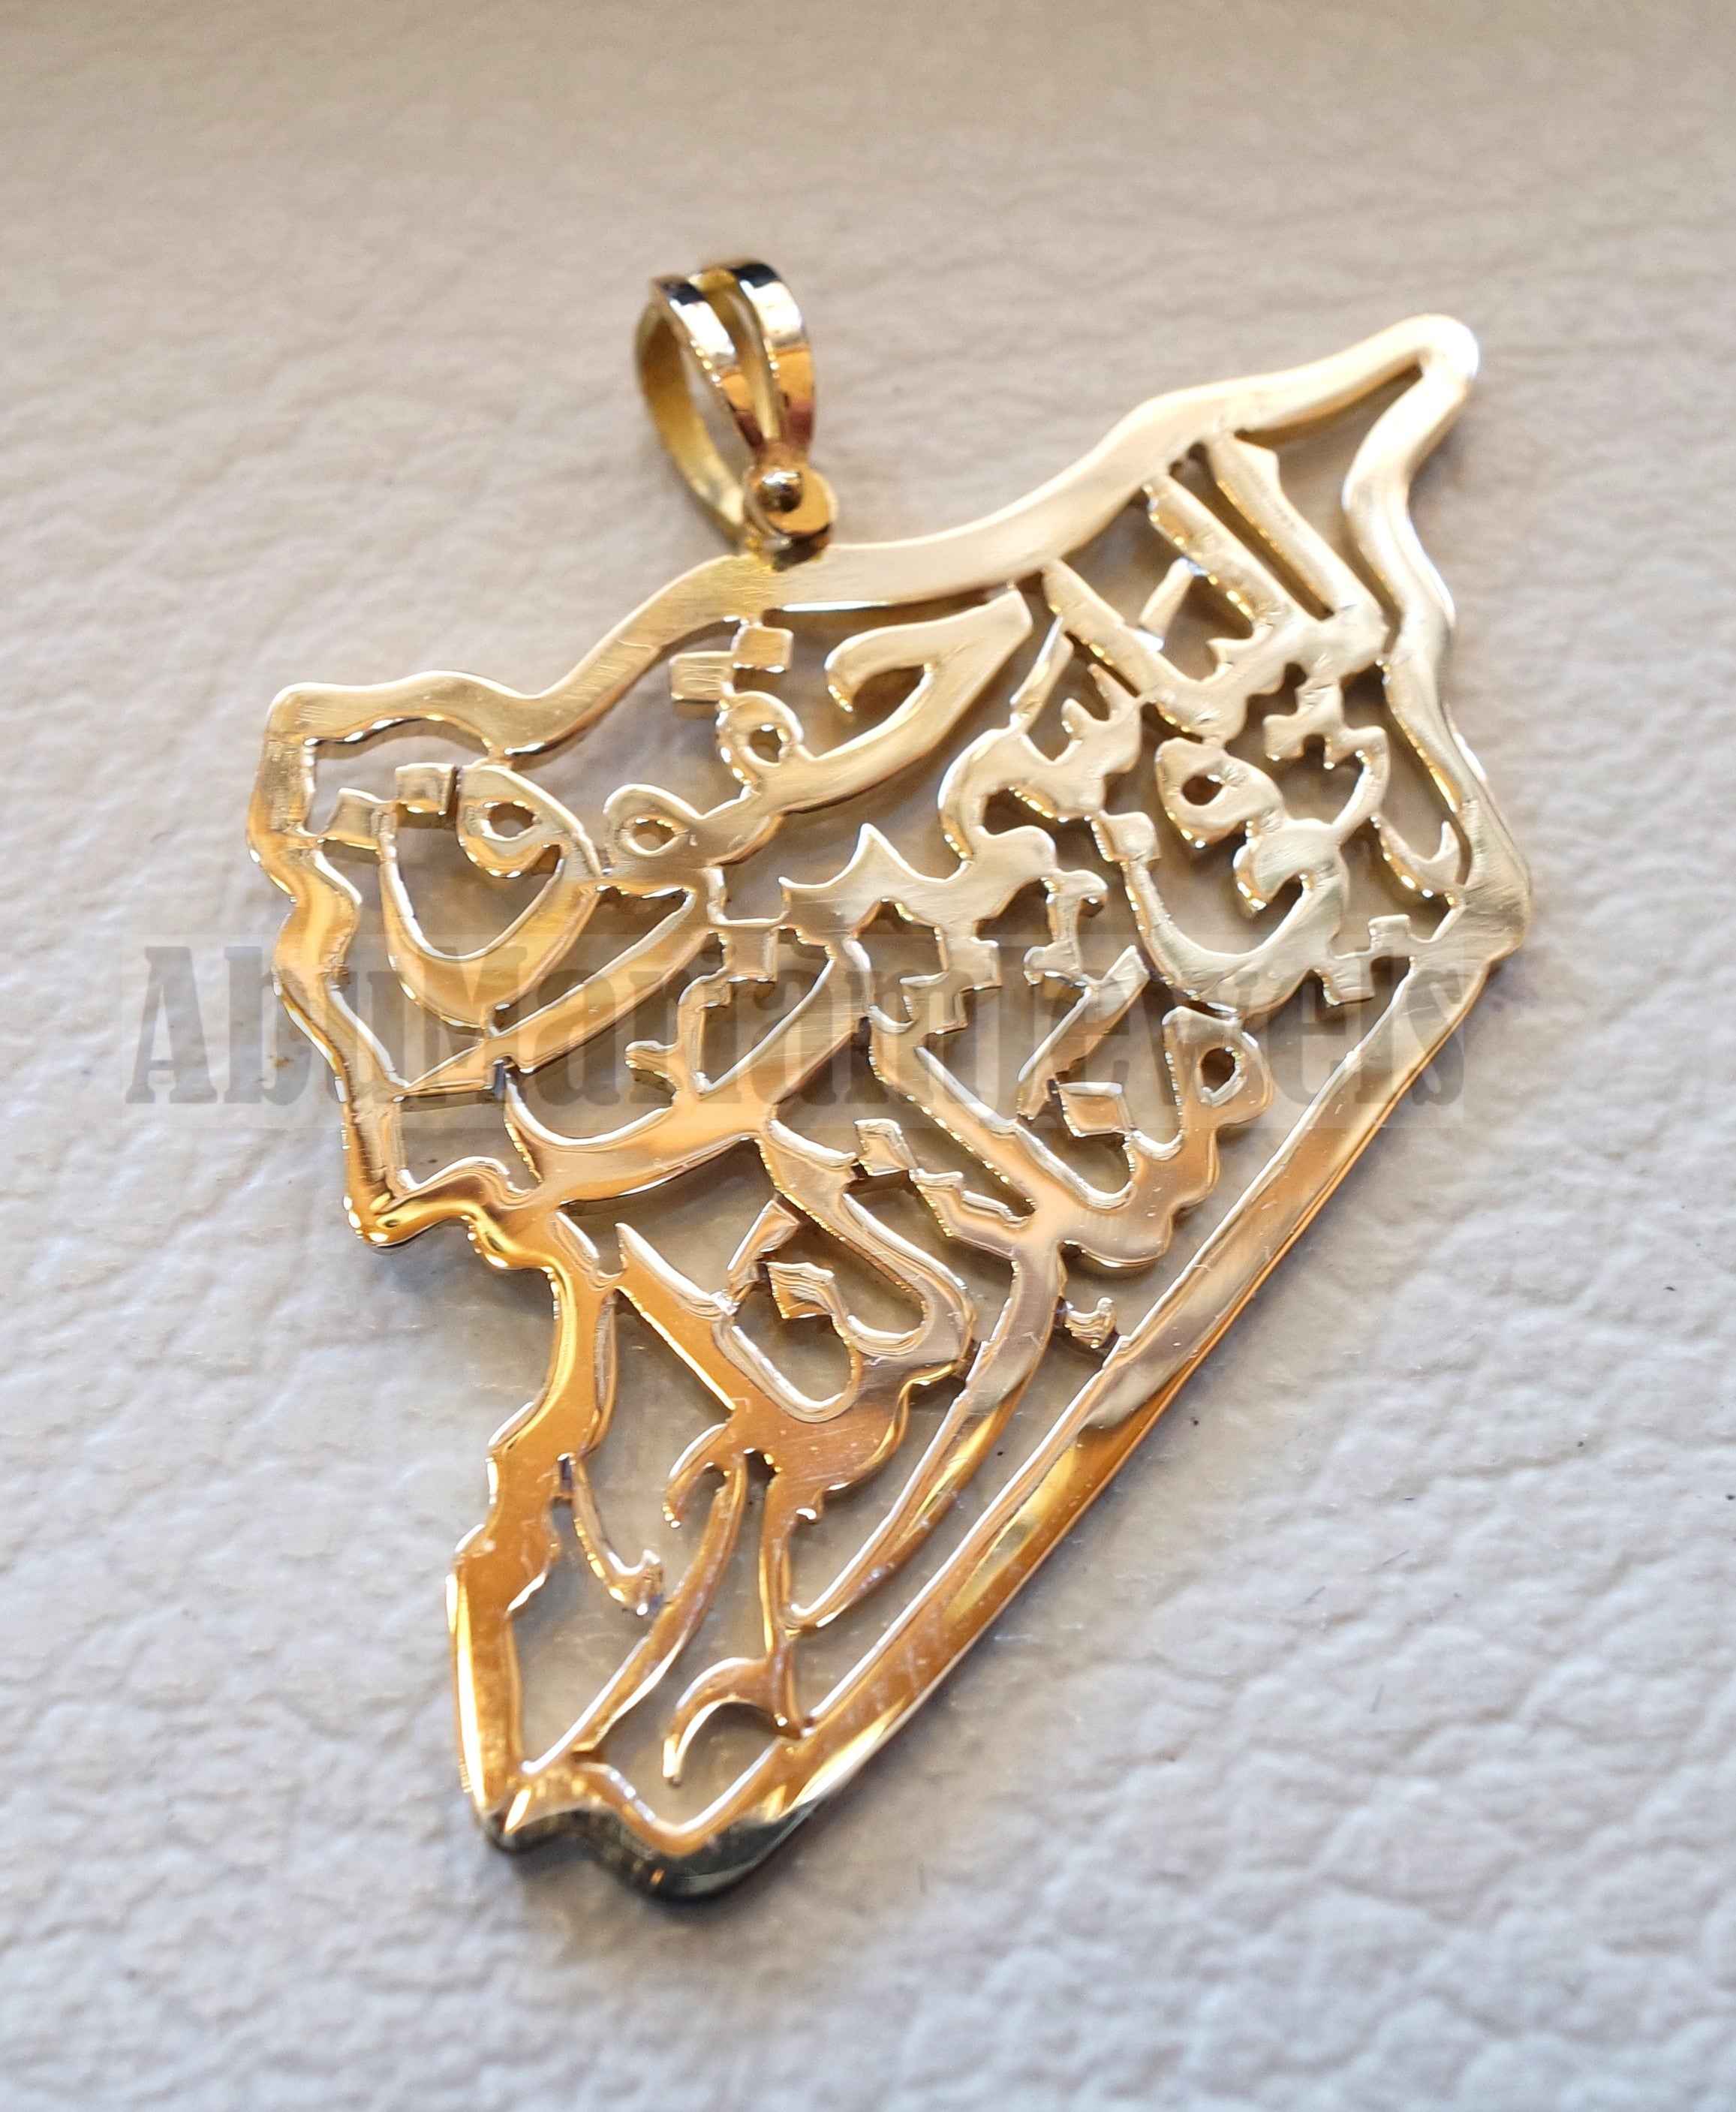 Syria map pendant with famous poem verse sterling 18k gold high quality jewelry arabic fast shipping خارطه سوريا